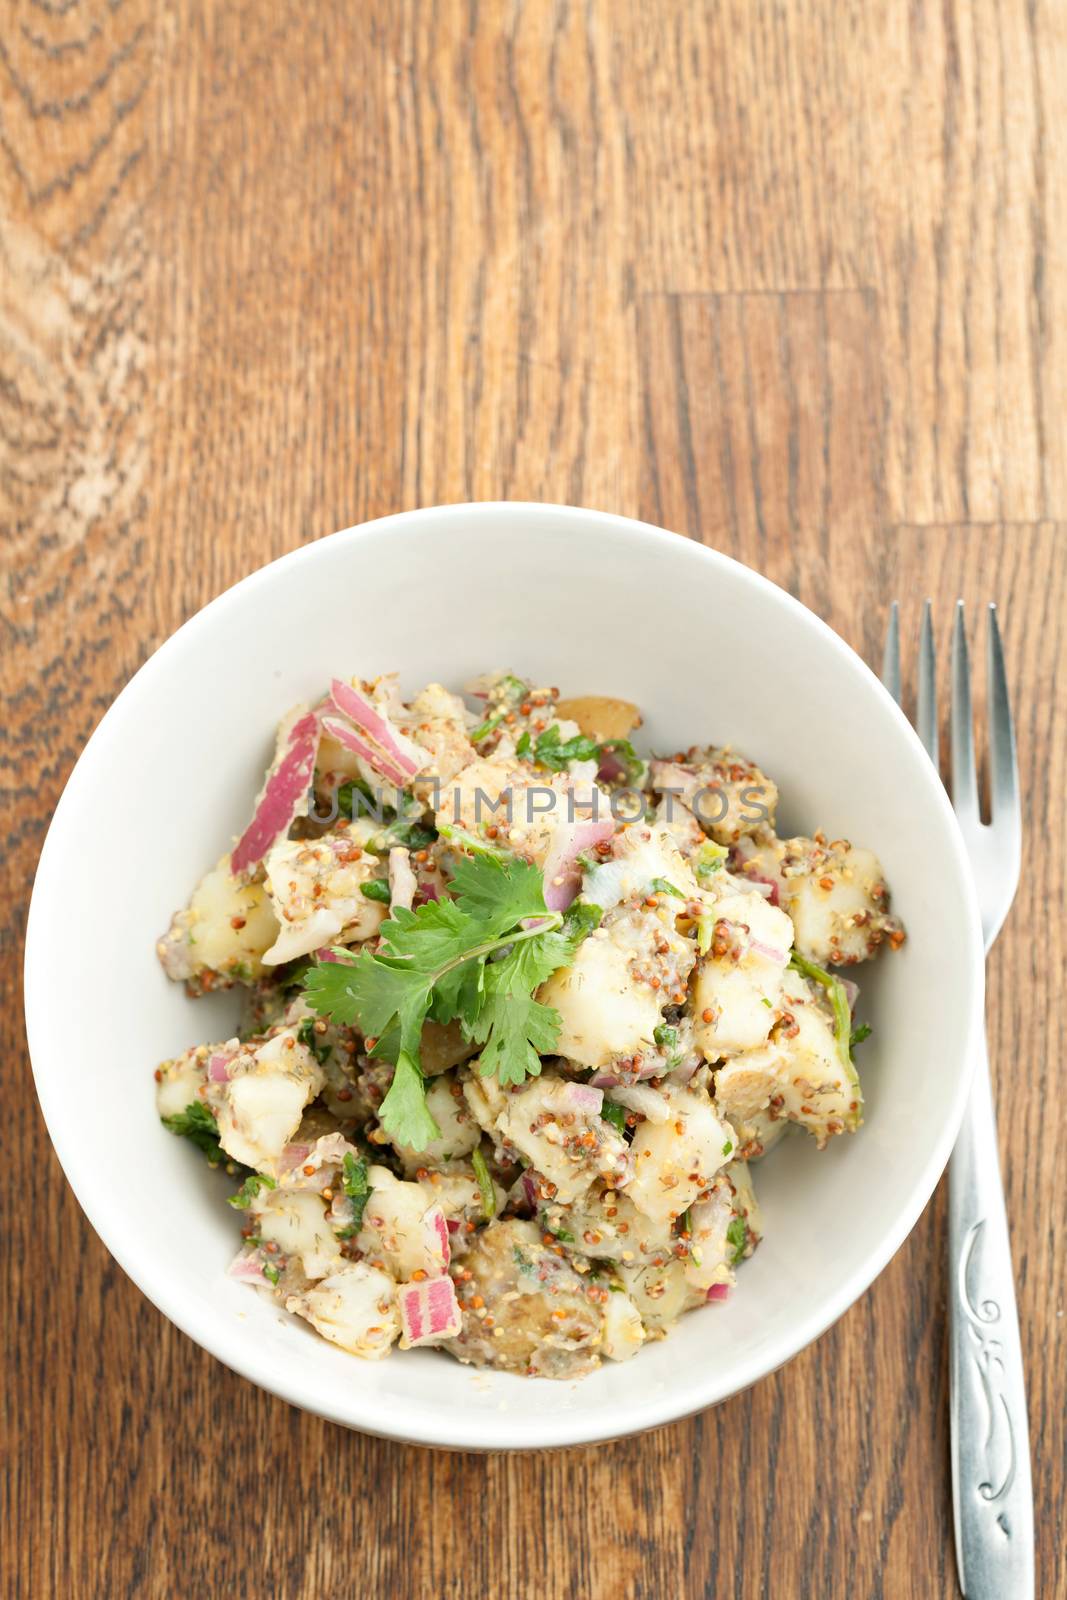 Bowl of Potato Salad by graficallyminded